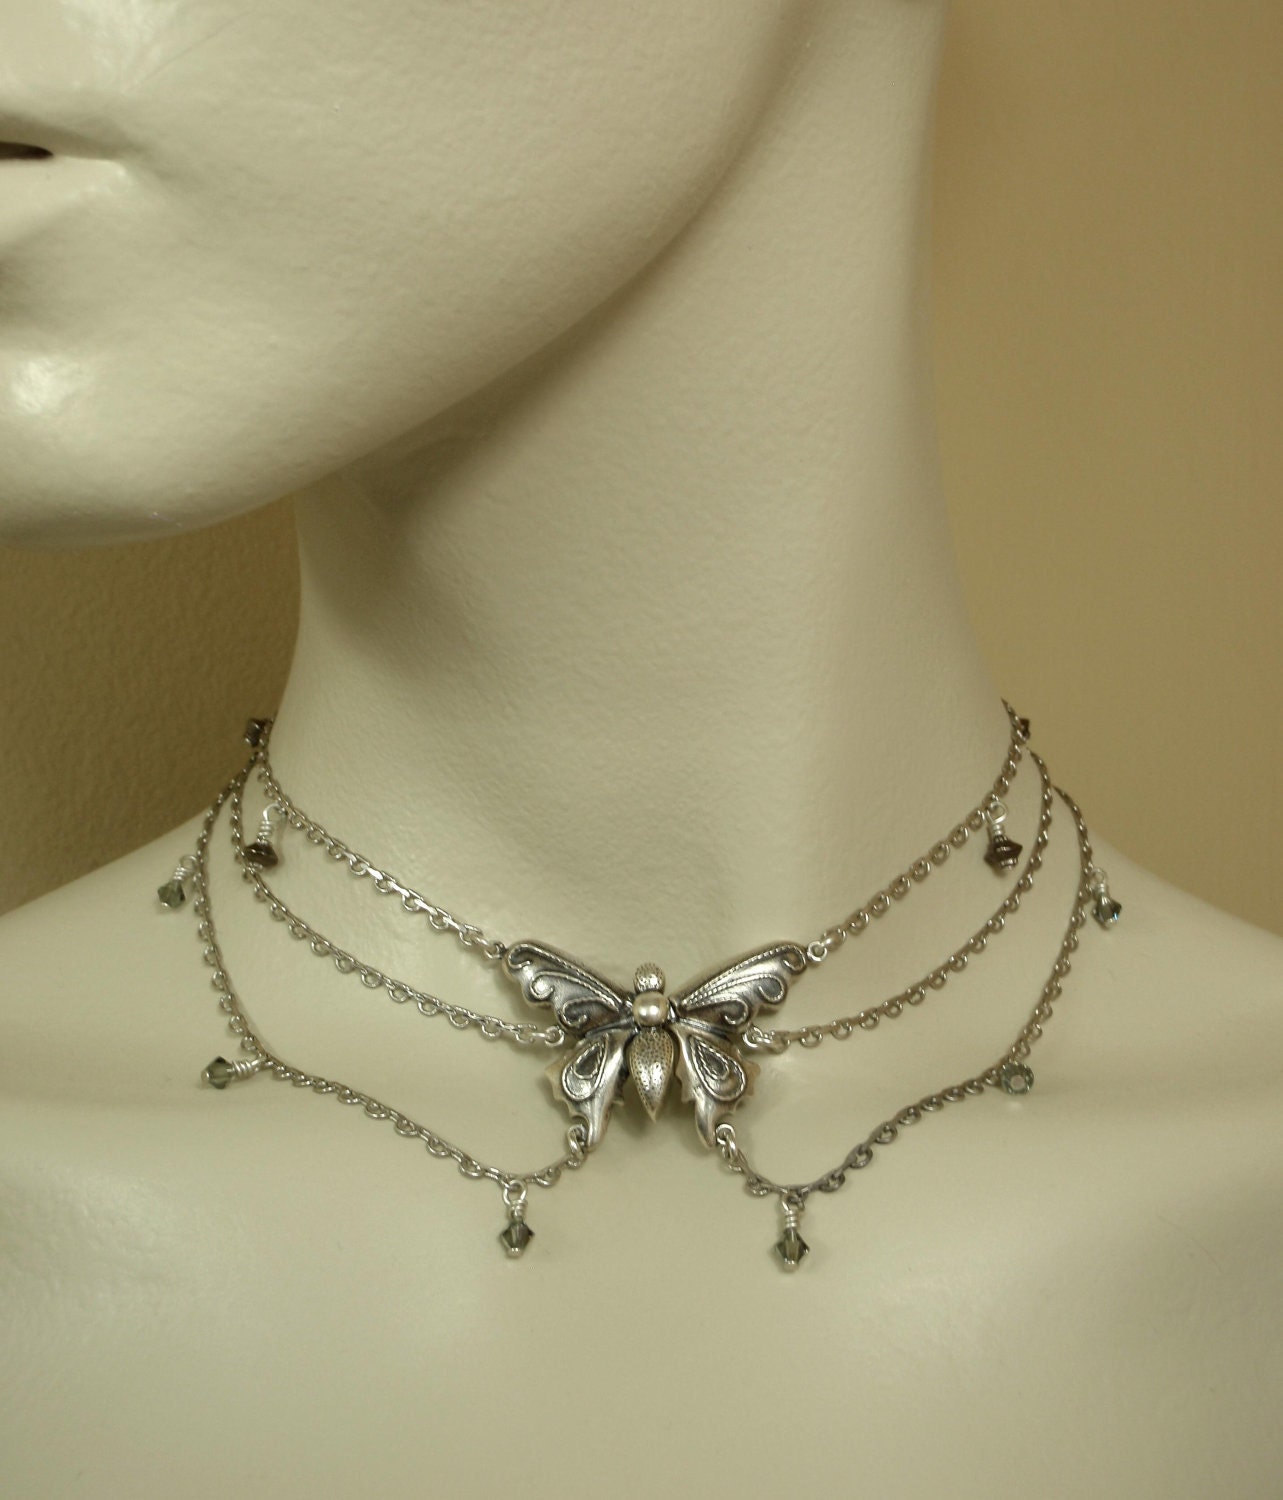 Chained Butterfly Necklace in Antique Sterling by unkamengifts